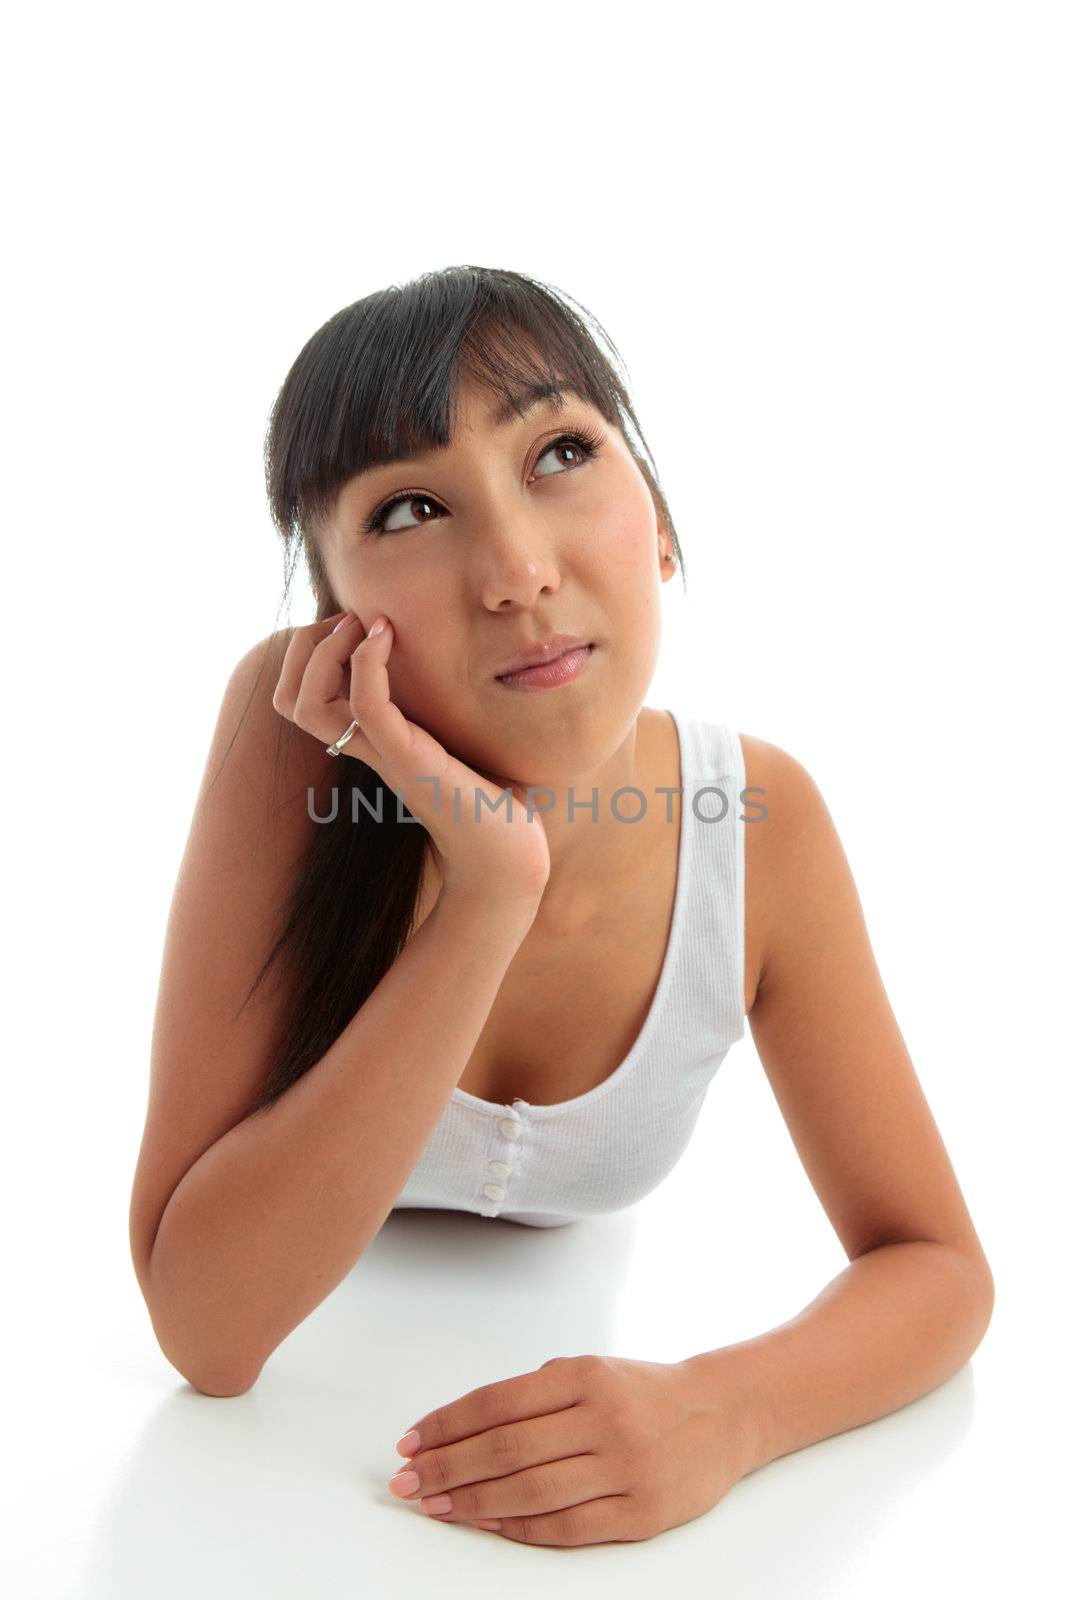 A young woman pondering or thinking.  She is looking up.  Space for copy.  White background.